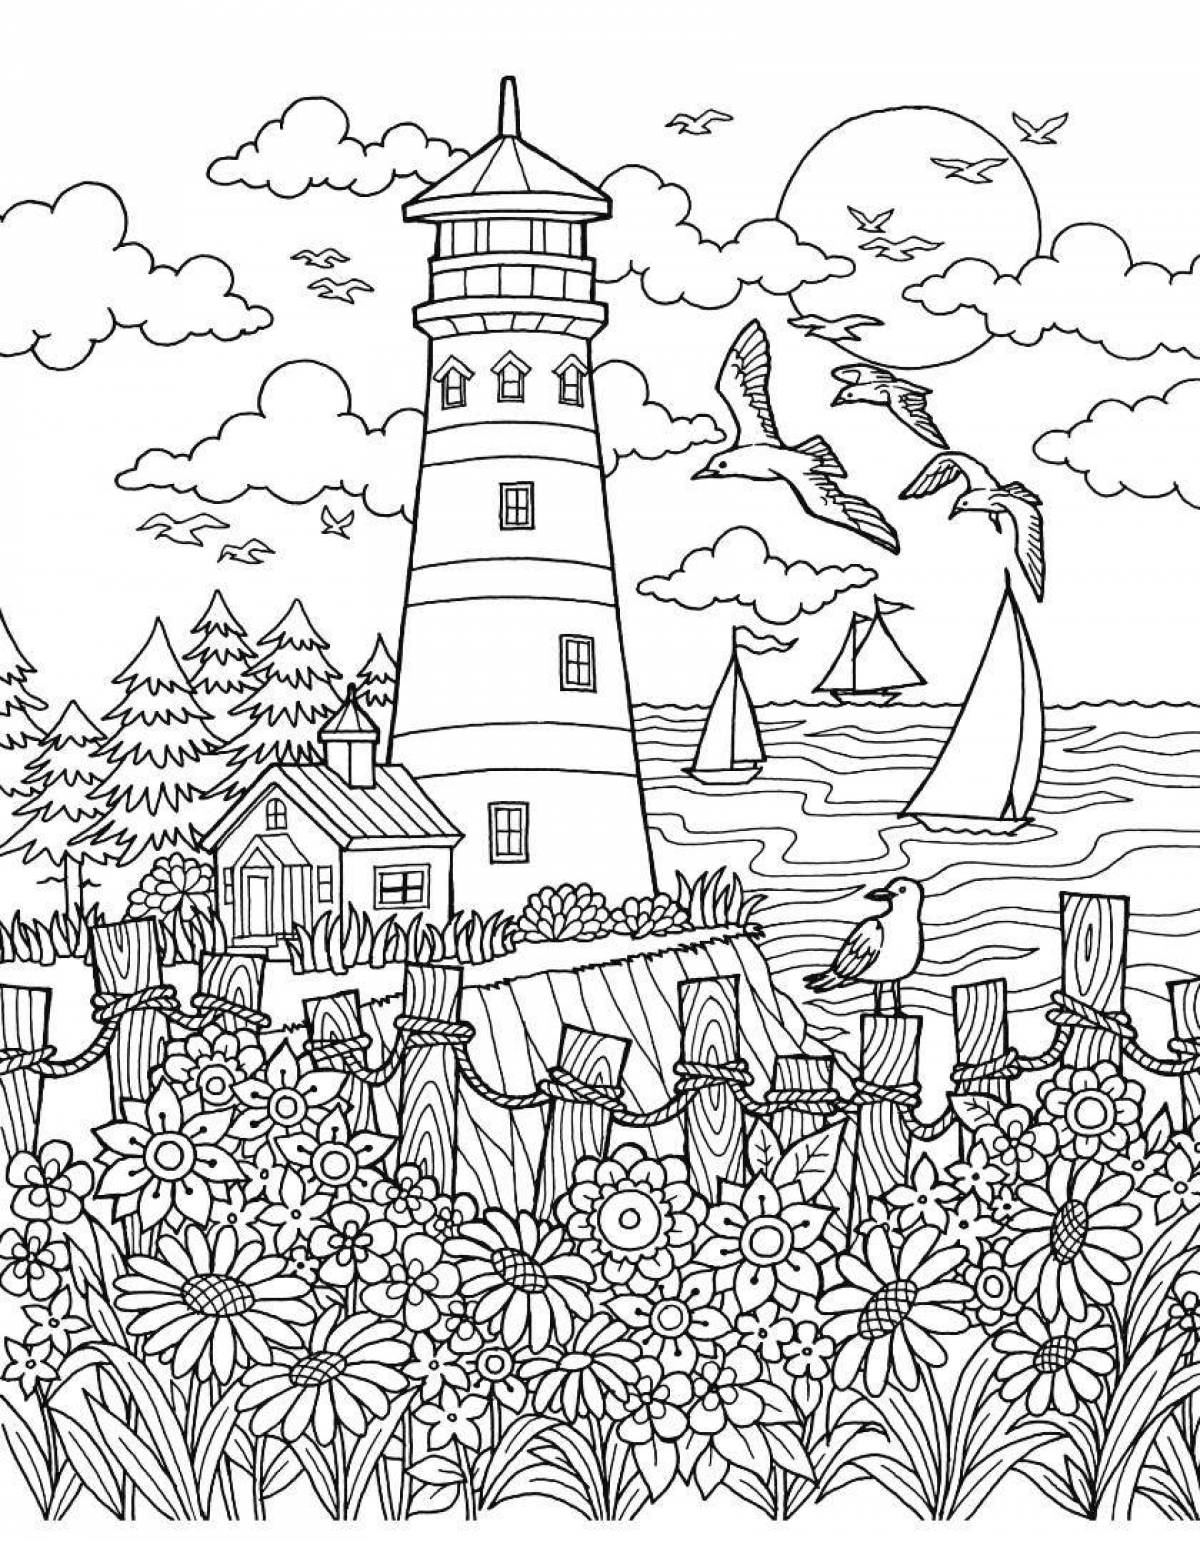 Sublime coloring page adult 18 nature